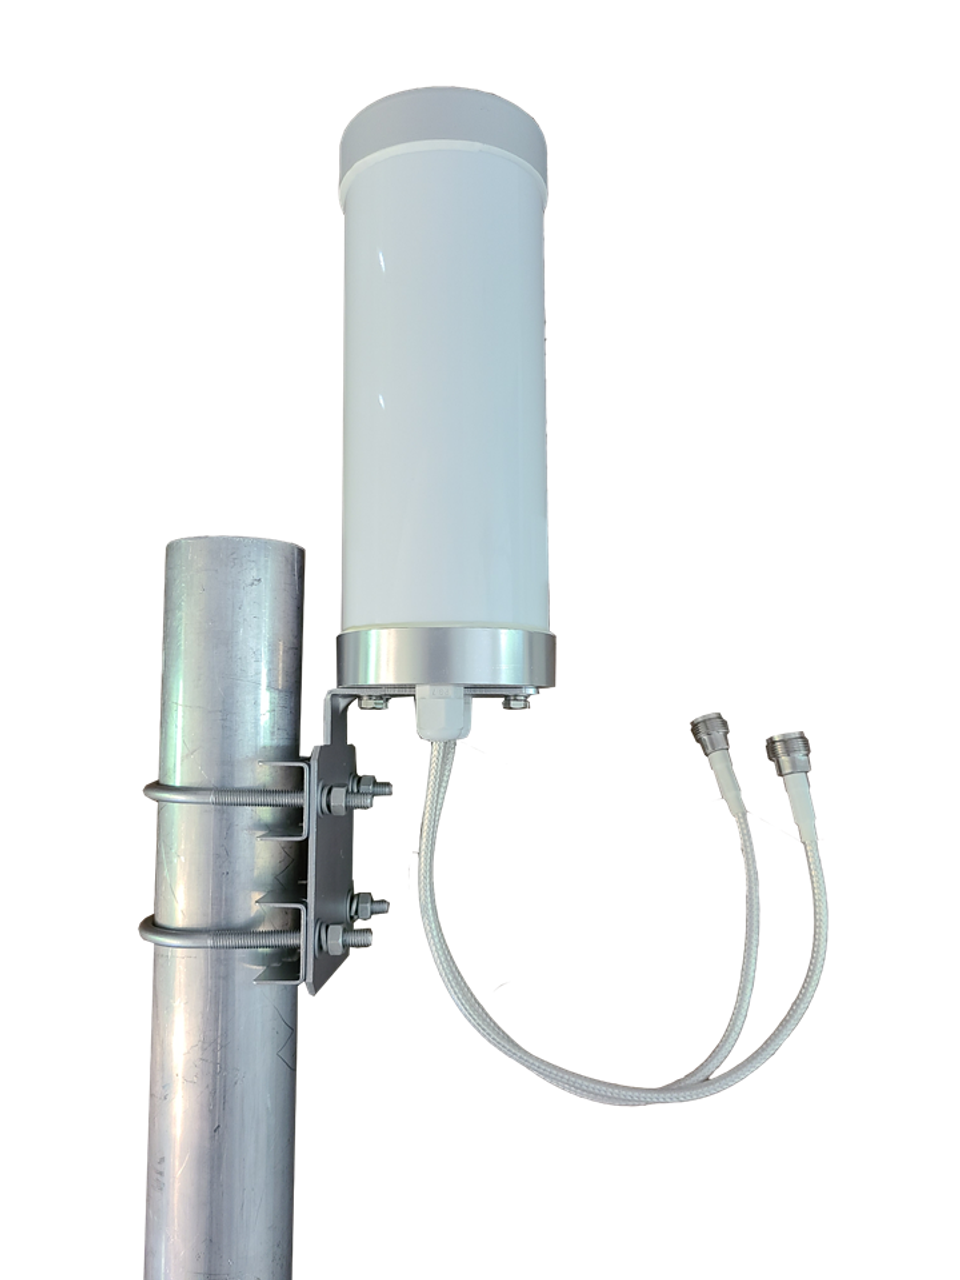 BEC MX-230 - M29 MIMO Omni Directional Cellular 3G 4G 5G LTE Band 71 External Data M2M IoT Antenna - 2x NF - Pole Mount